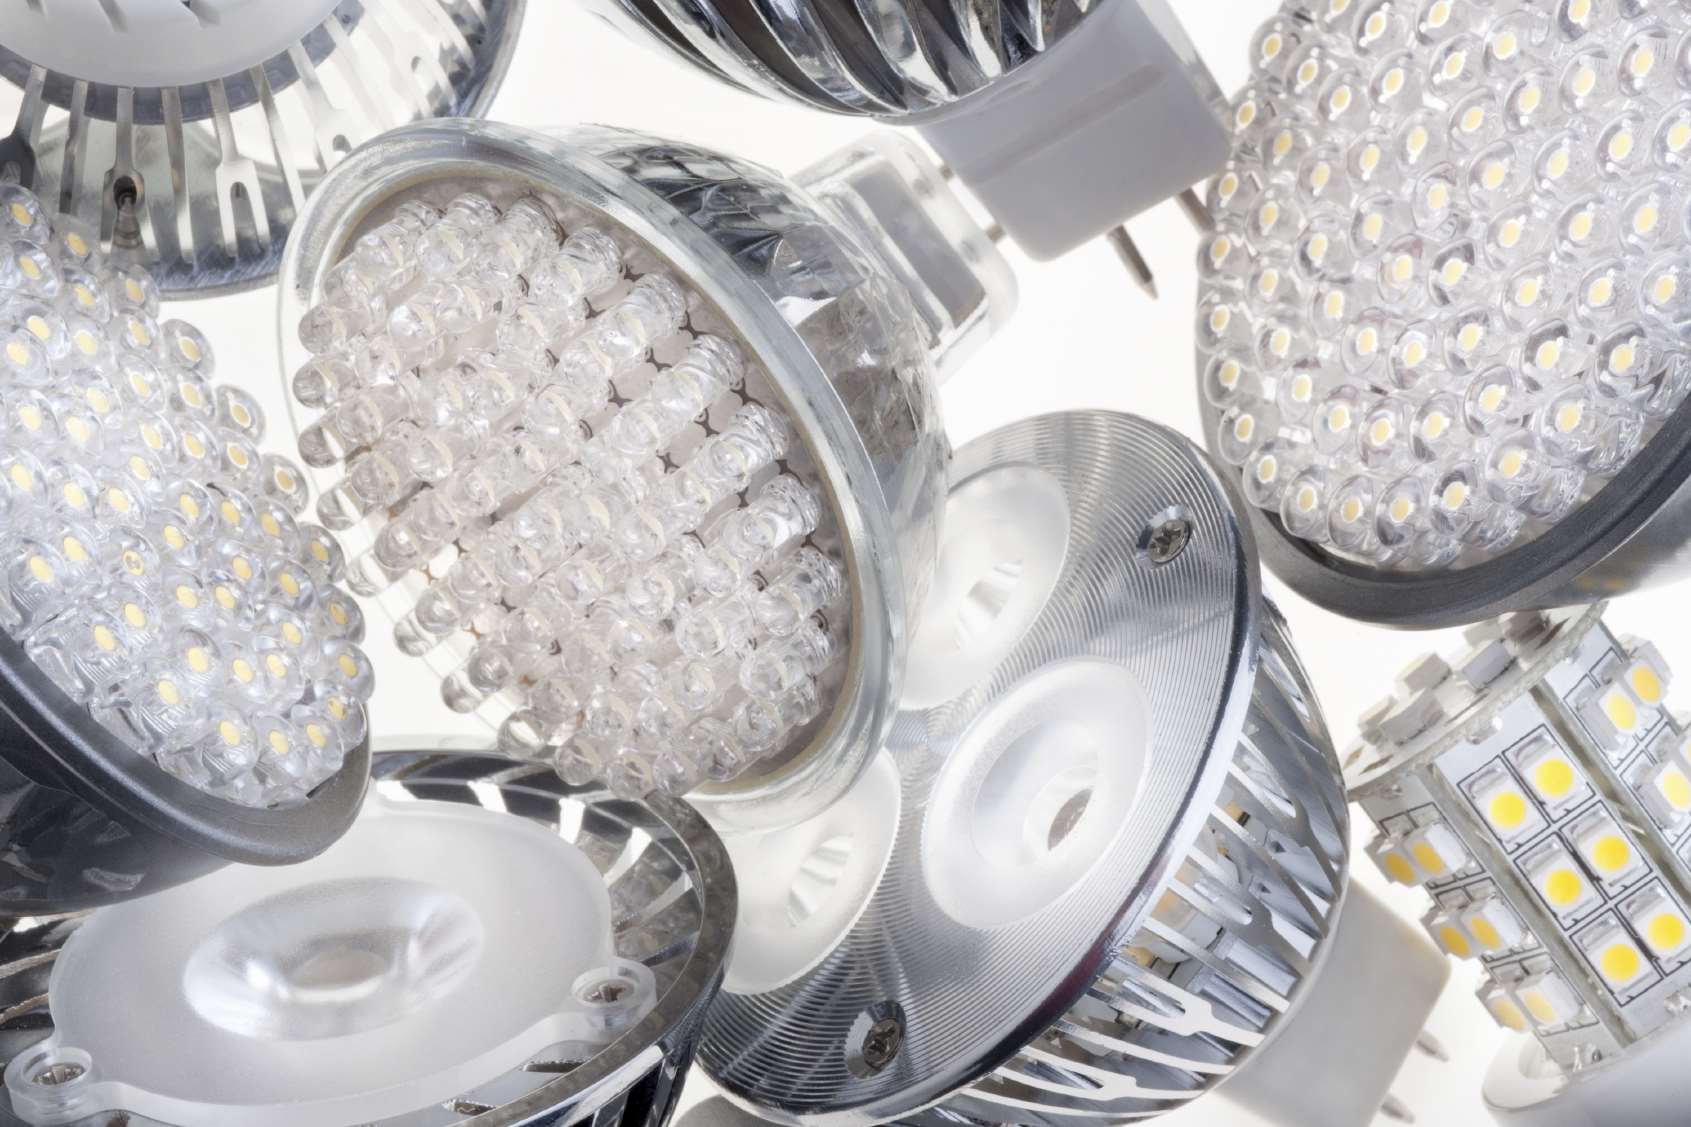 APC Technology has won two LED lighting contracts. Picture: iStock.com